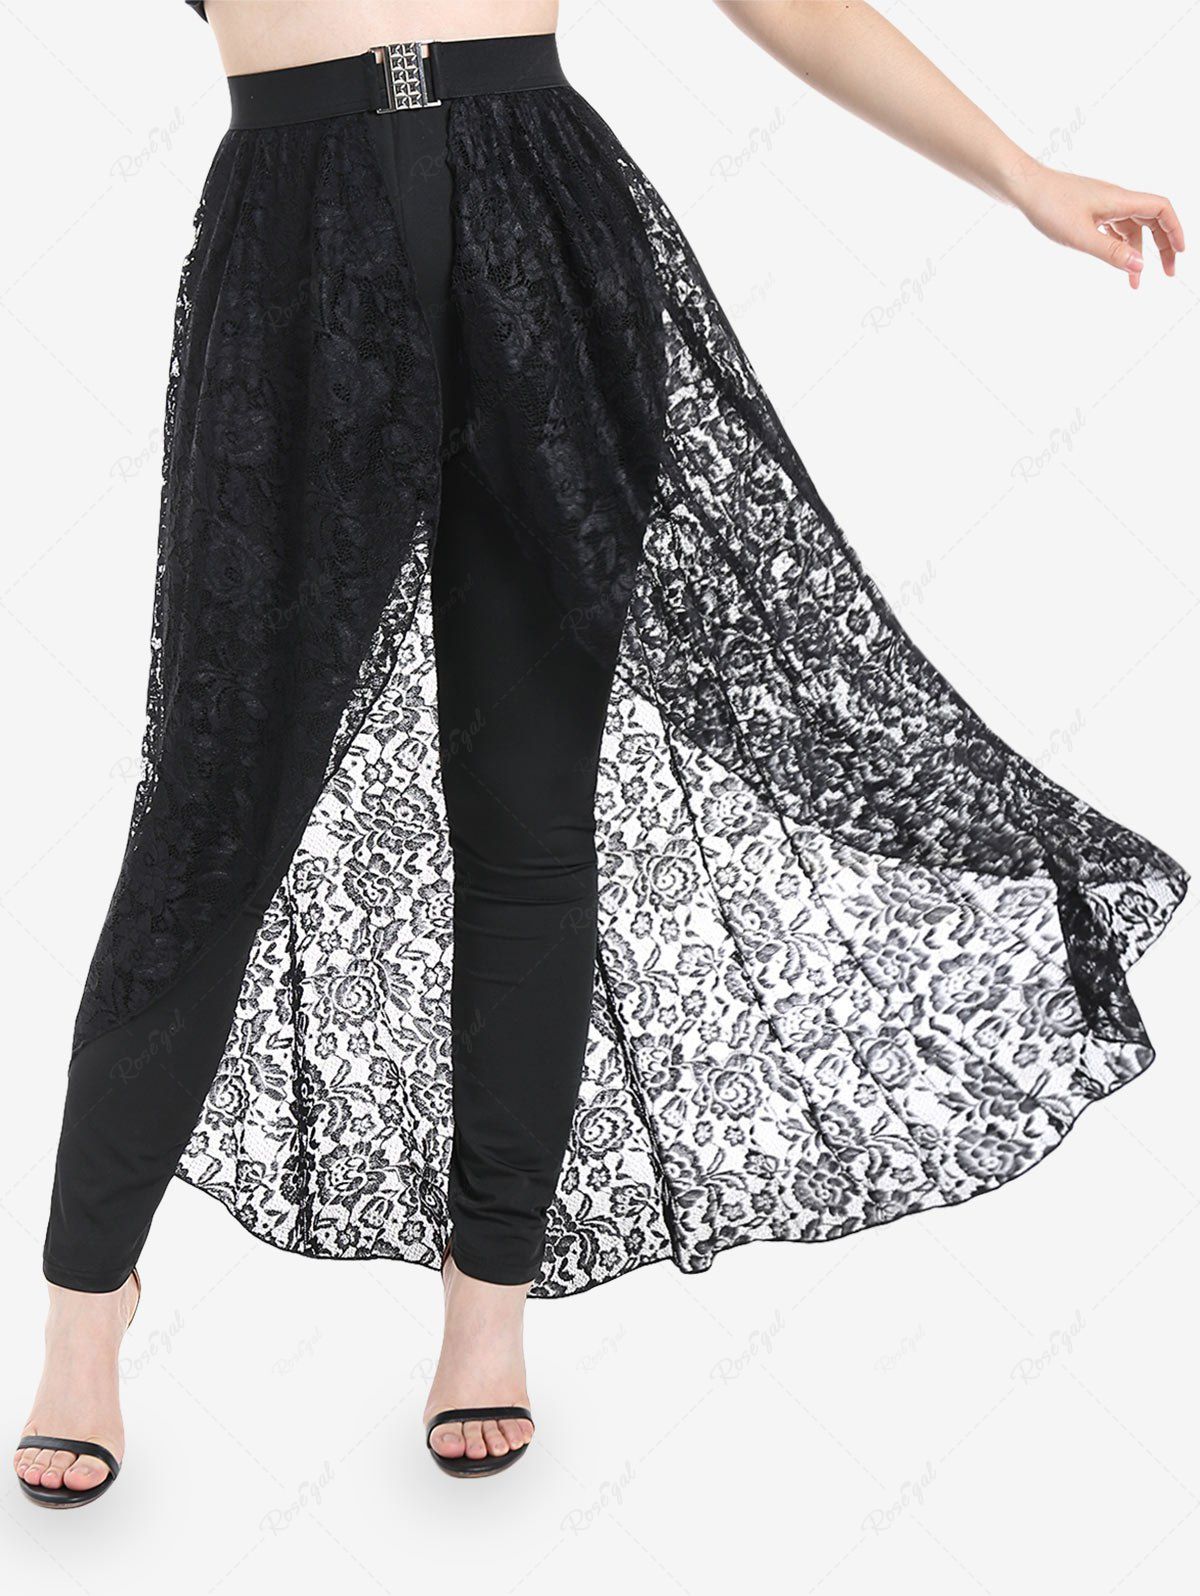 Affordable Plus Size High Rise Solid Pants with High Low Lace Overlay  